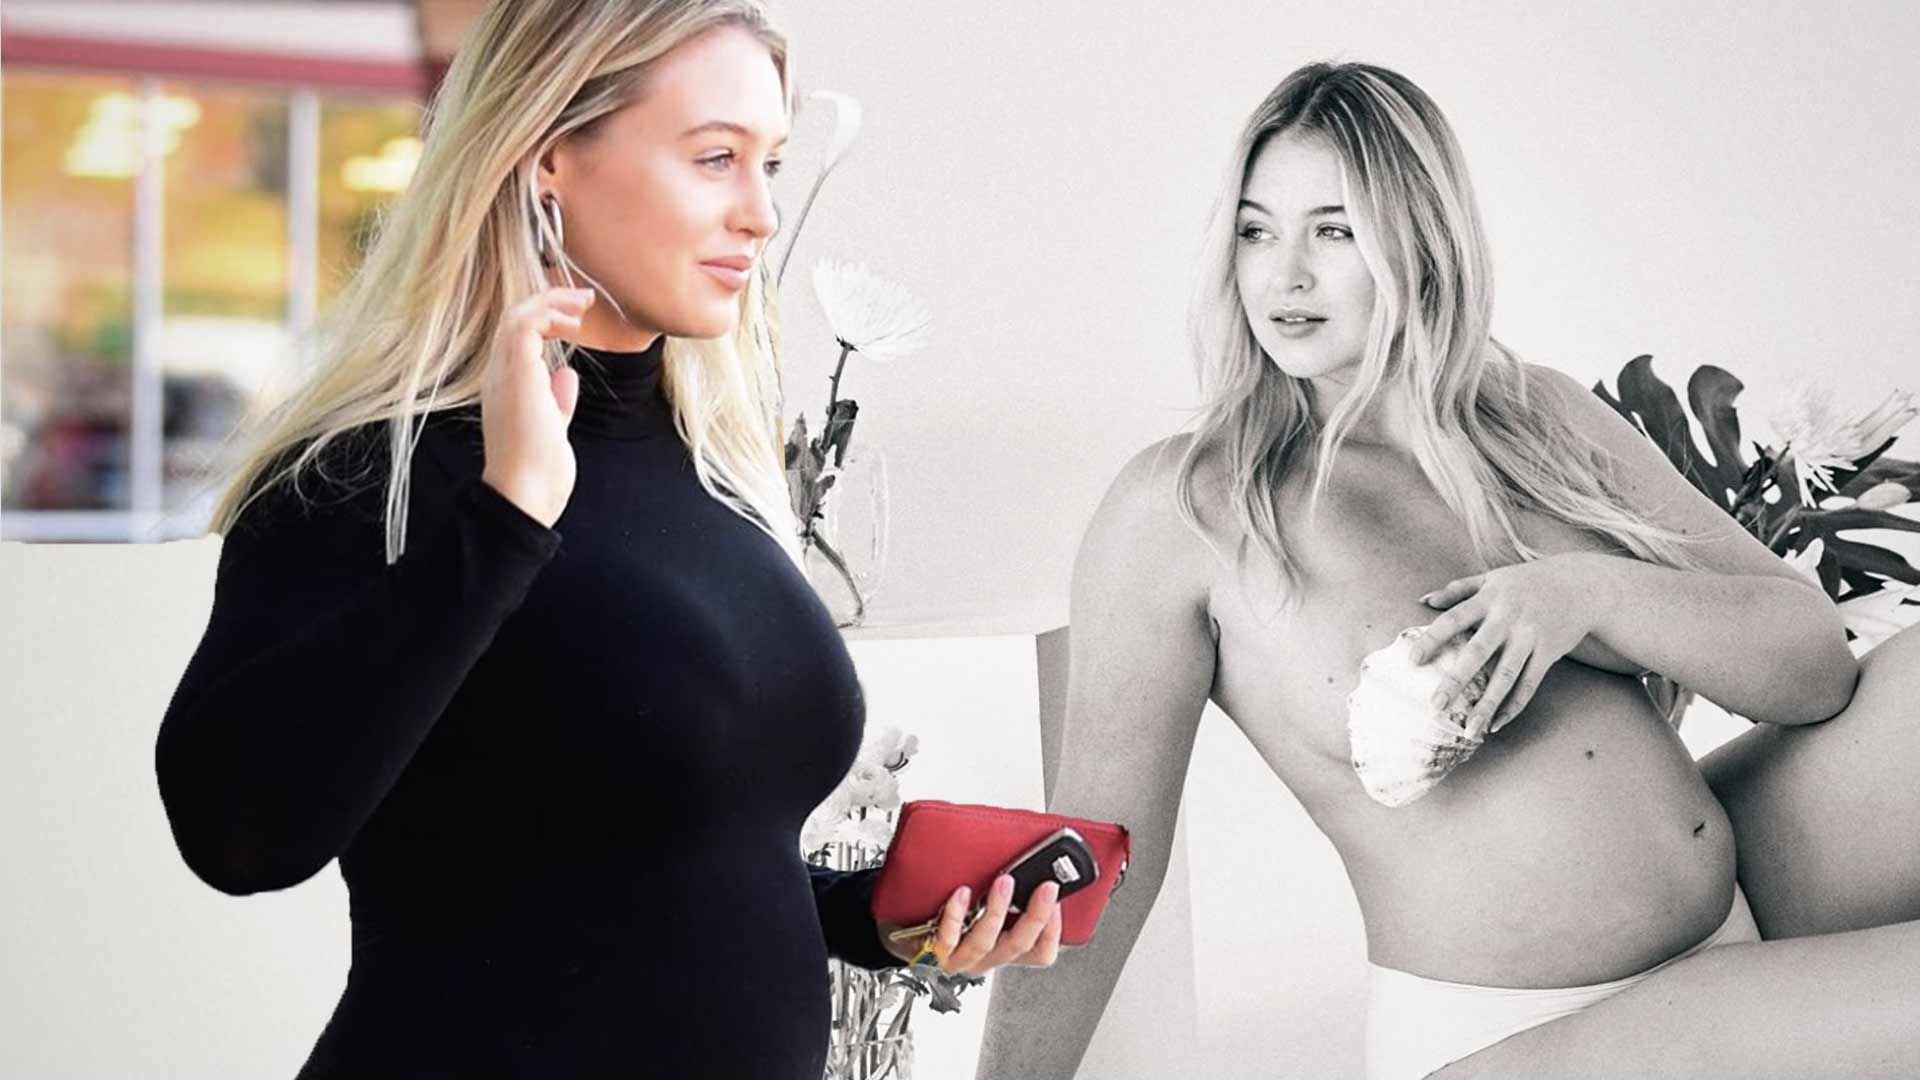 Iskra Lawrence Exposes Much More Than Her Bump In New Pregnancy Snaps